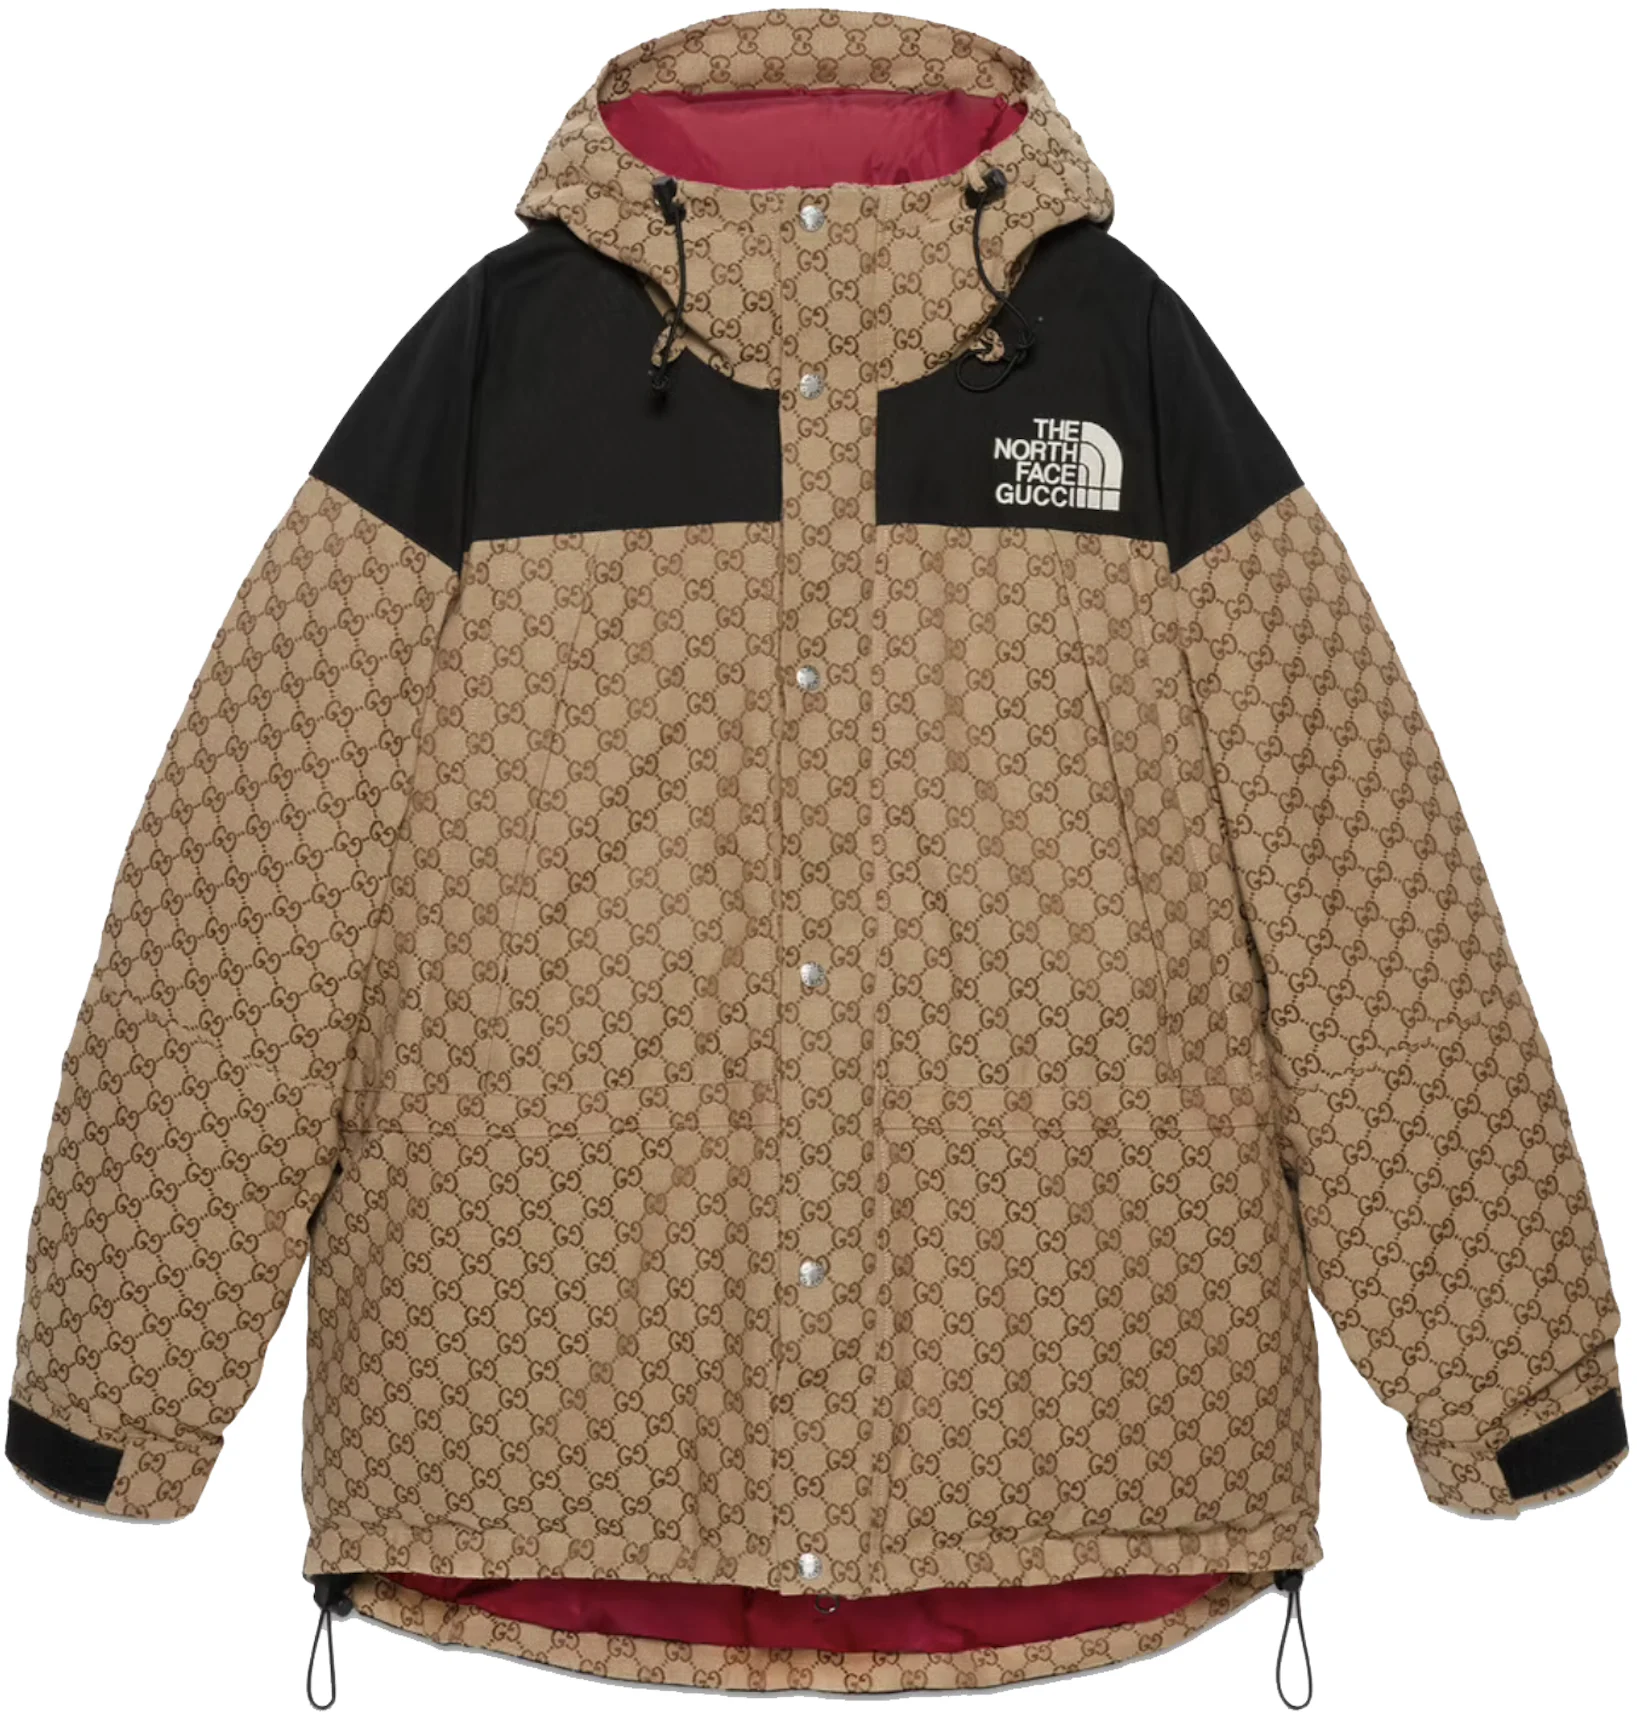 Gucci x The North Face Padded Jacket: StockX Pick of the Week - StockX News